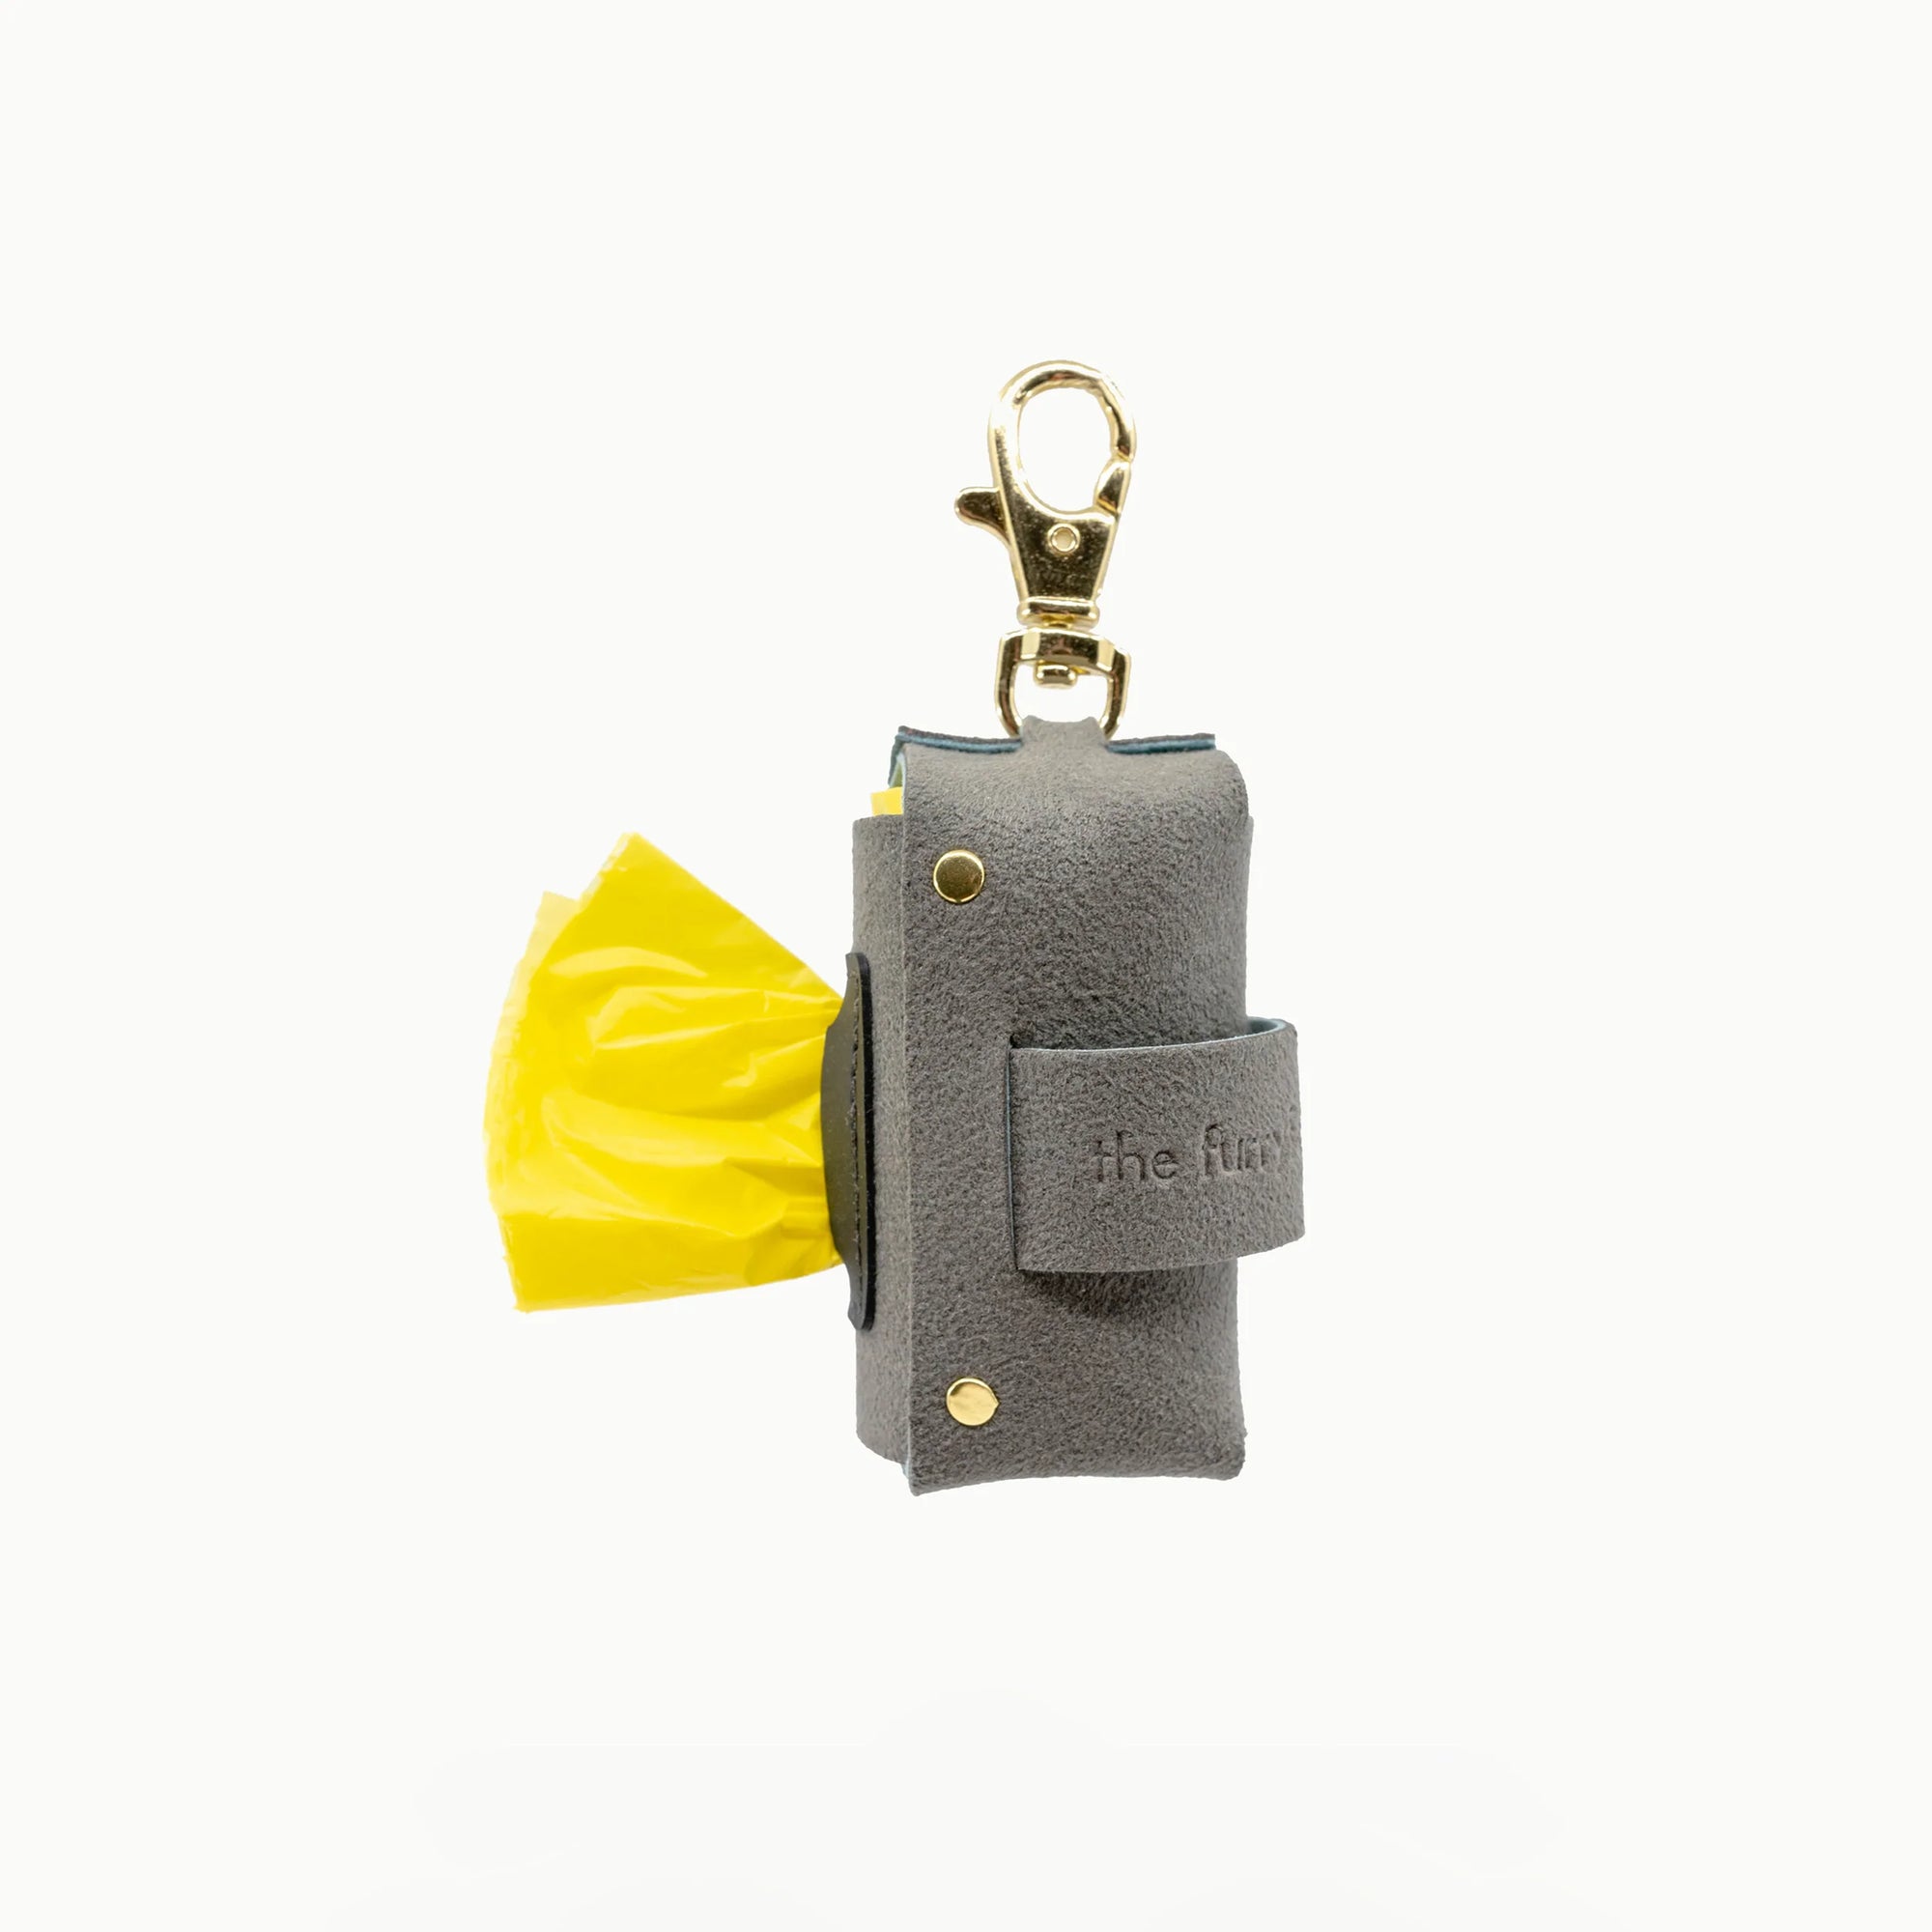 The photo shows a grey dog poop bag holder with a yellow bag protruding, affixed with a gold clip, and stamped with "the furryfolks" brand, designed for ease during dog walks.